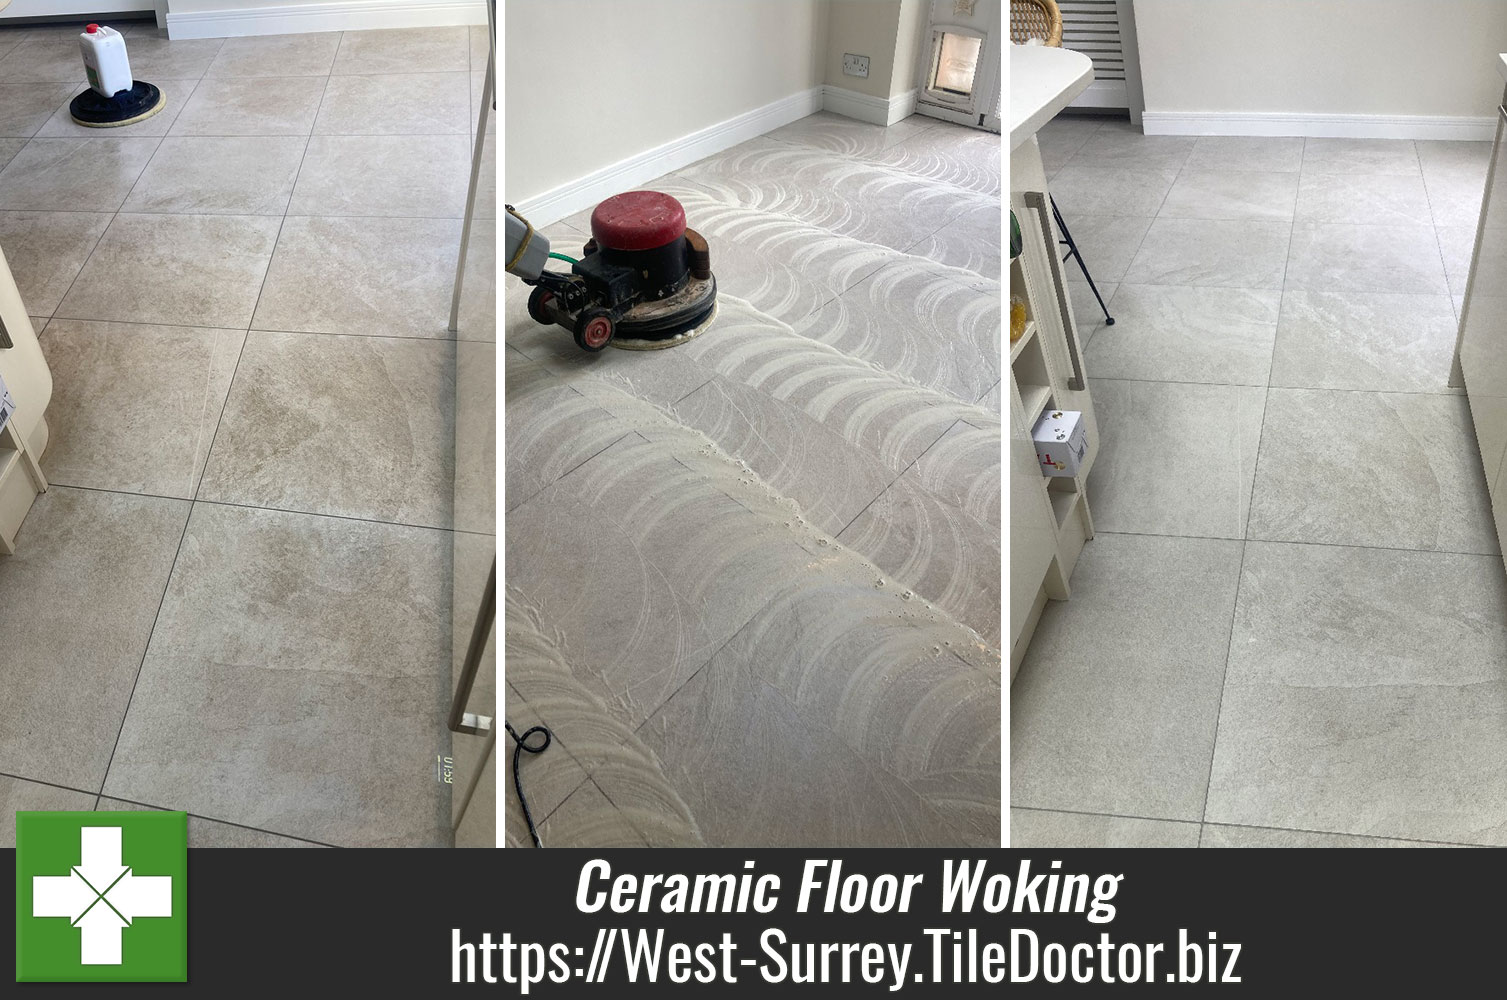 Deep Cleaning Ceramic Tile and Grout with Tile Doctor Pro-Clean in Woking Surrey